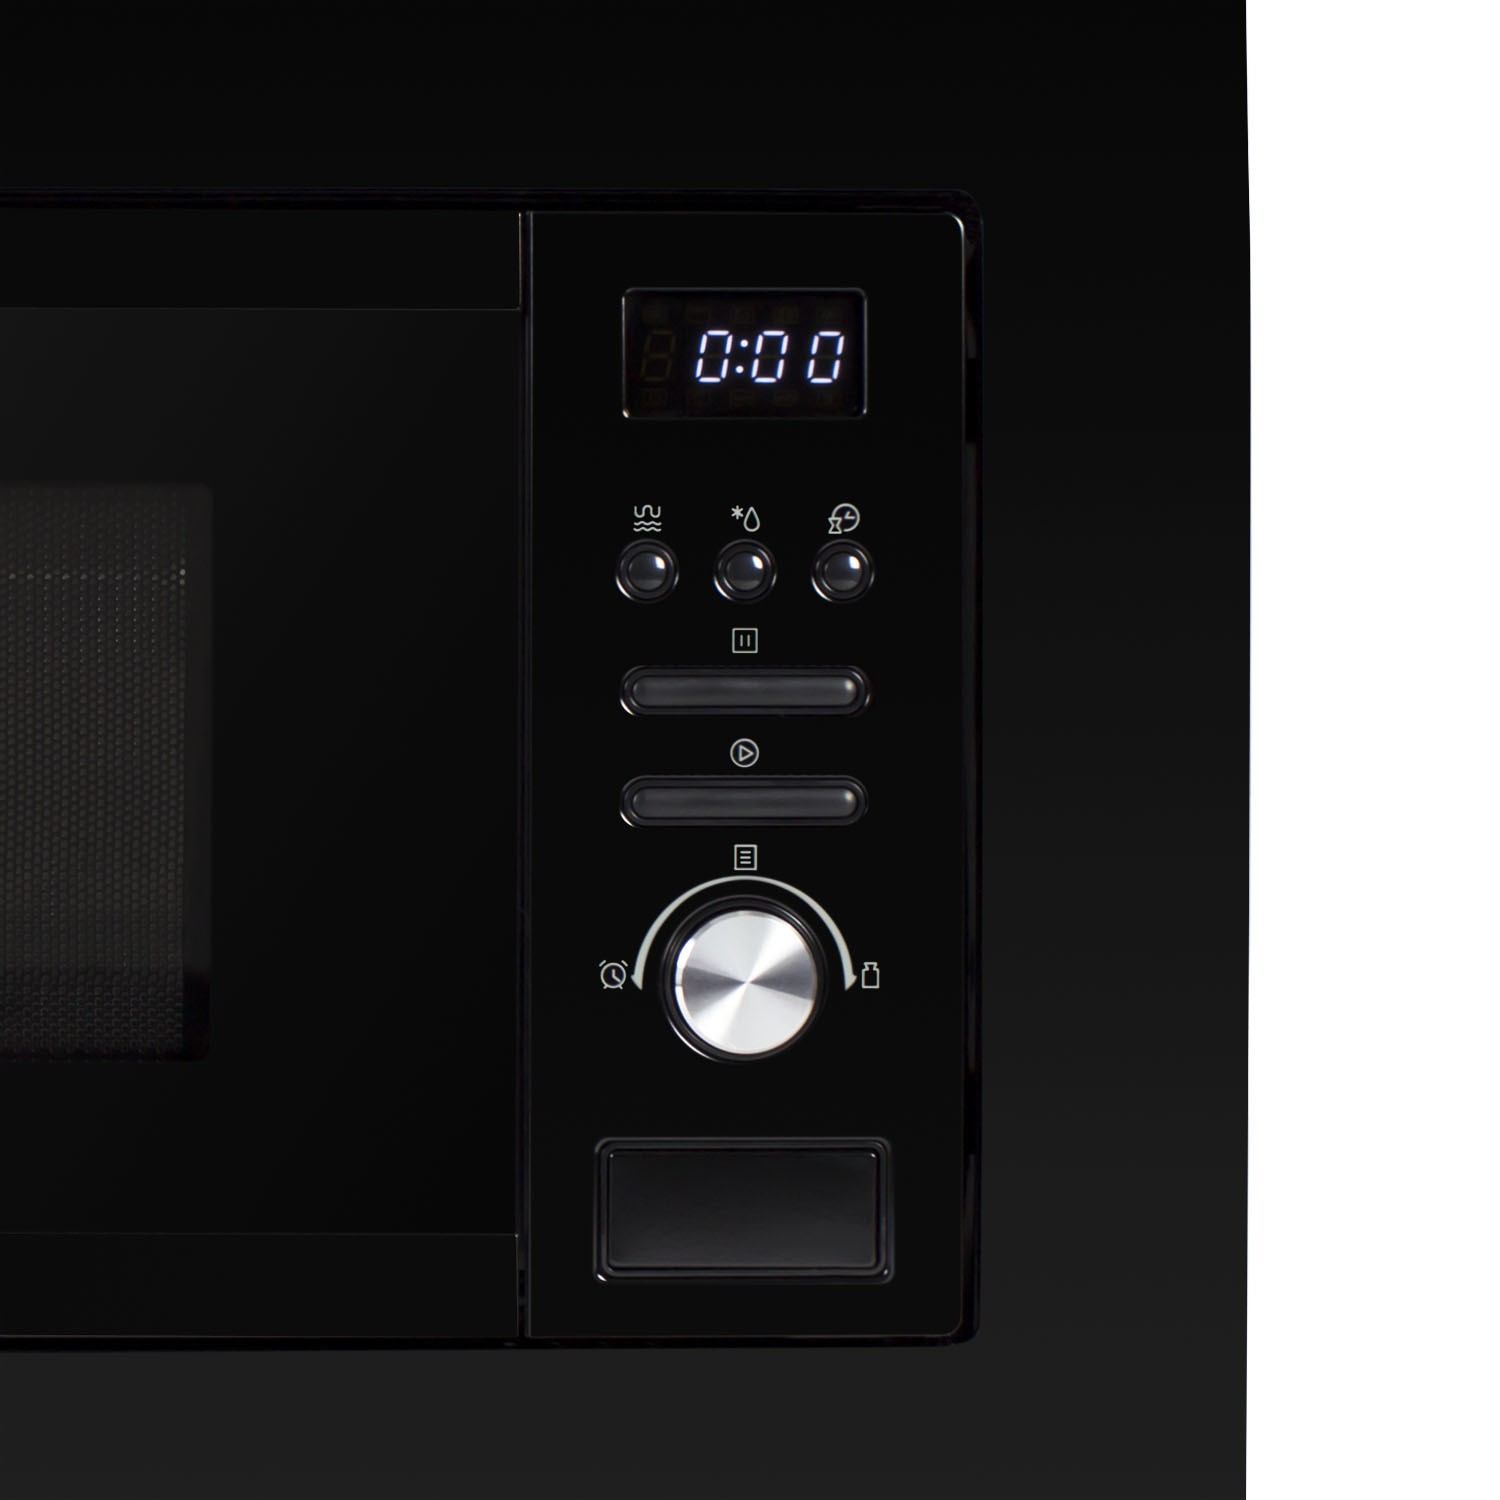 ElectrIQ 20L Built-in Microwave with Grill Black